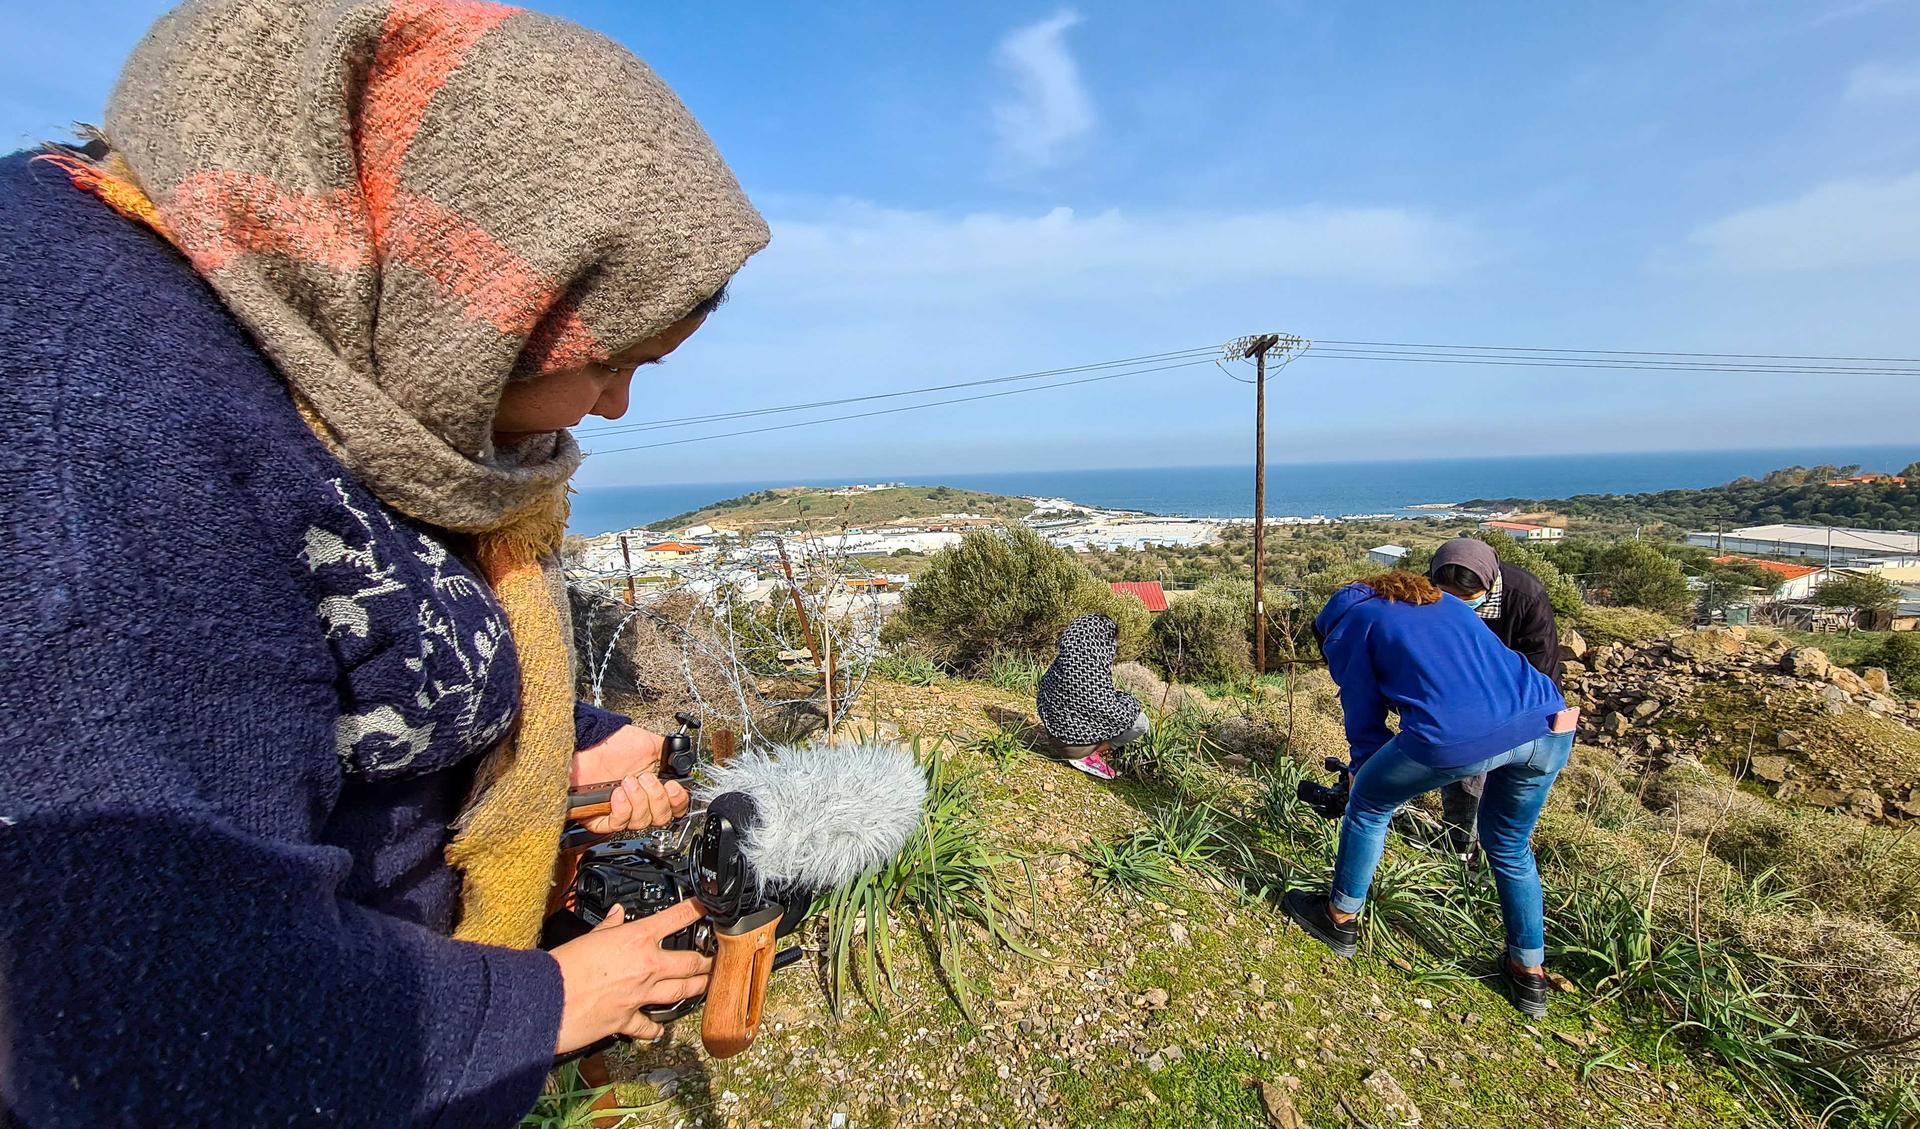 Two women are outside on Lesvos and are filming in the landscape.